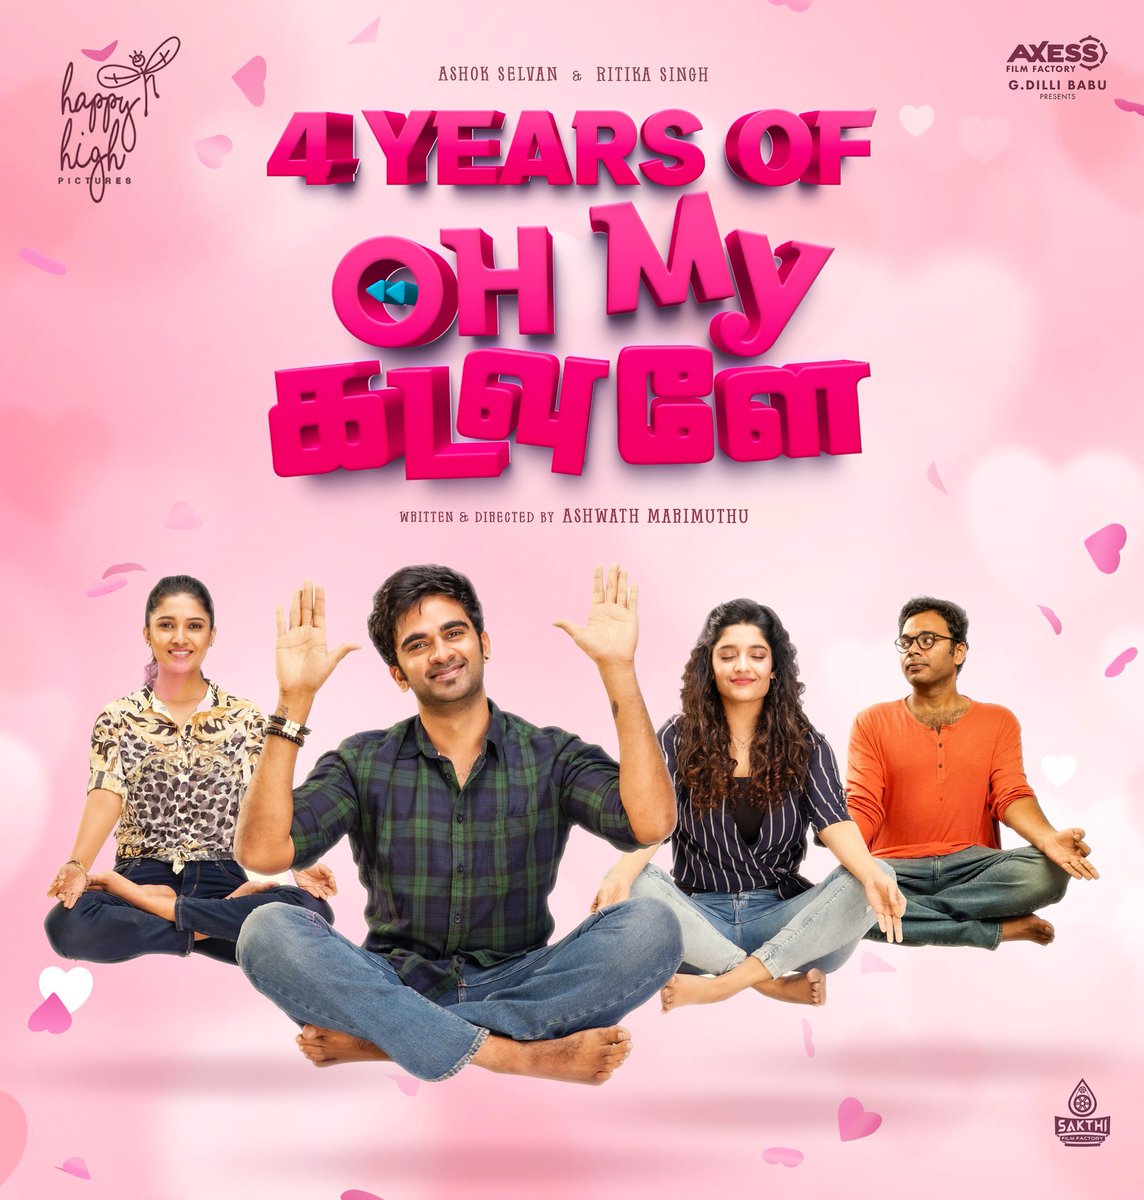 #OhMyKadavule will always be special to me. Thank you my audience and my team 🤗

And, Happy Valentine’s Day! ❤️

#4YearsOfOhMyKadavule